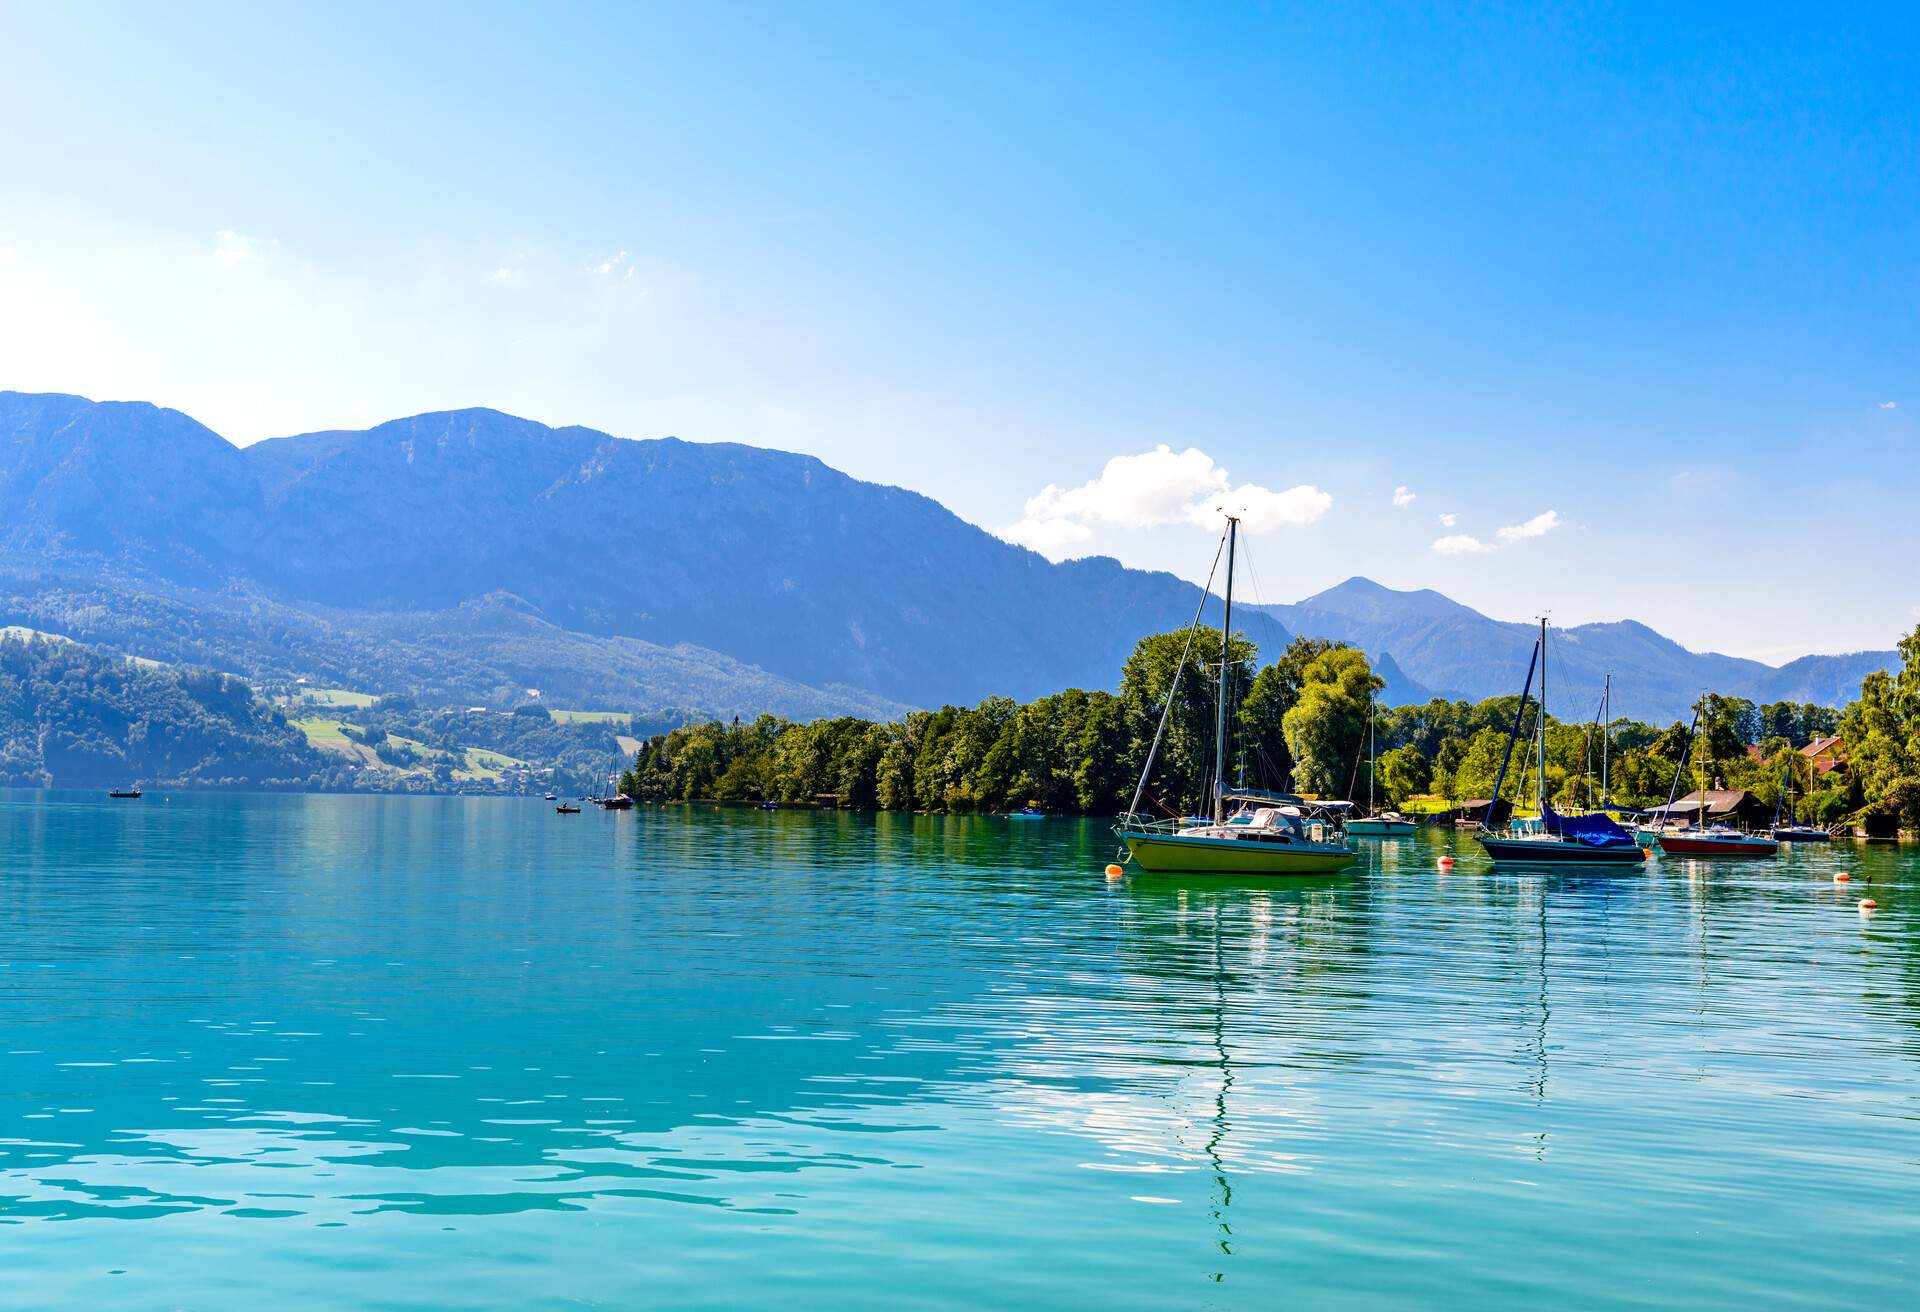 Beautiful view on Attersee lake im Salzkammergut alps mountains, boats, sailboats, sailboat  by in Nussdorf, Zell am Attersee. Upper Austria, nearby Salzburg.; Shutterstock ID 1491081023